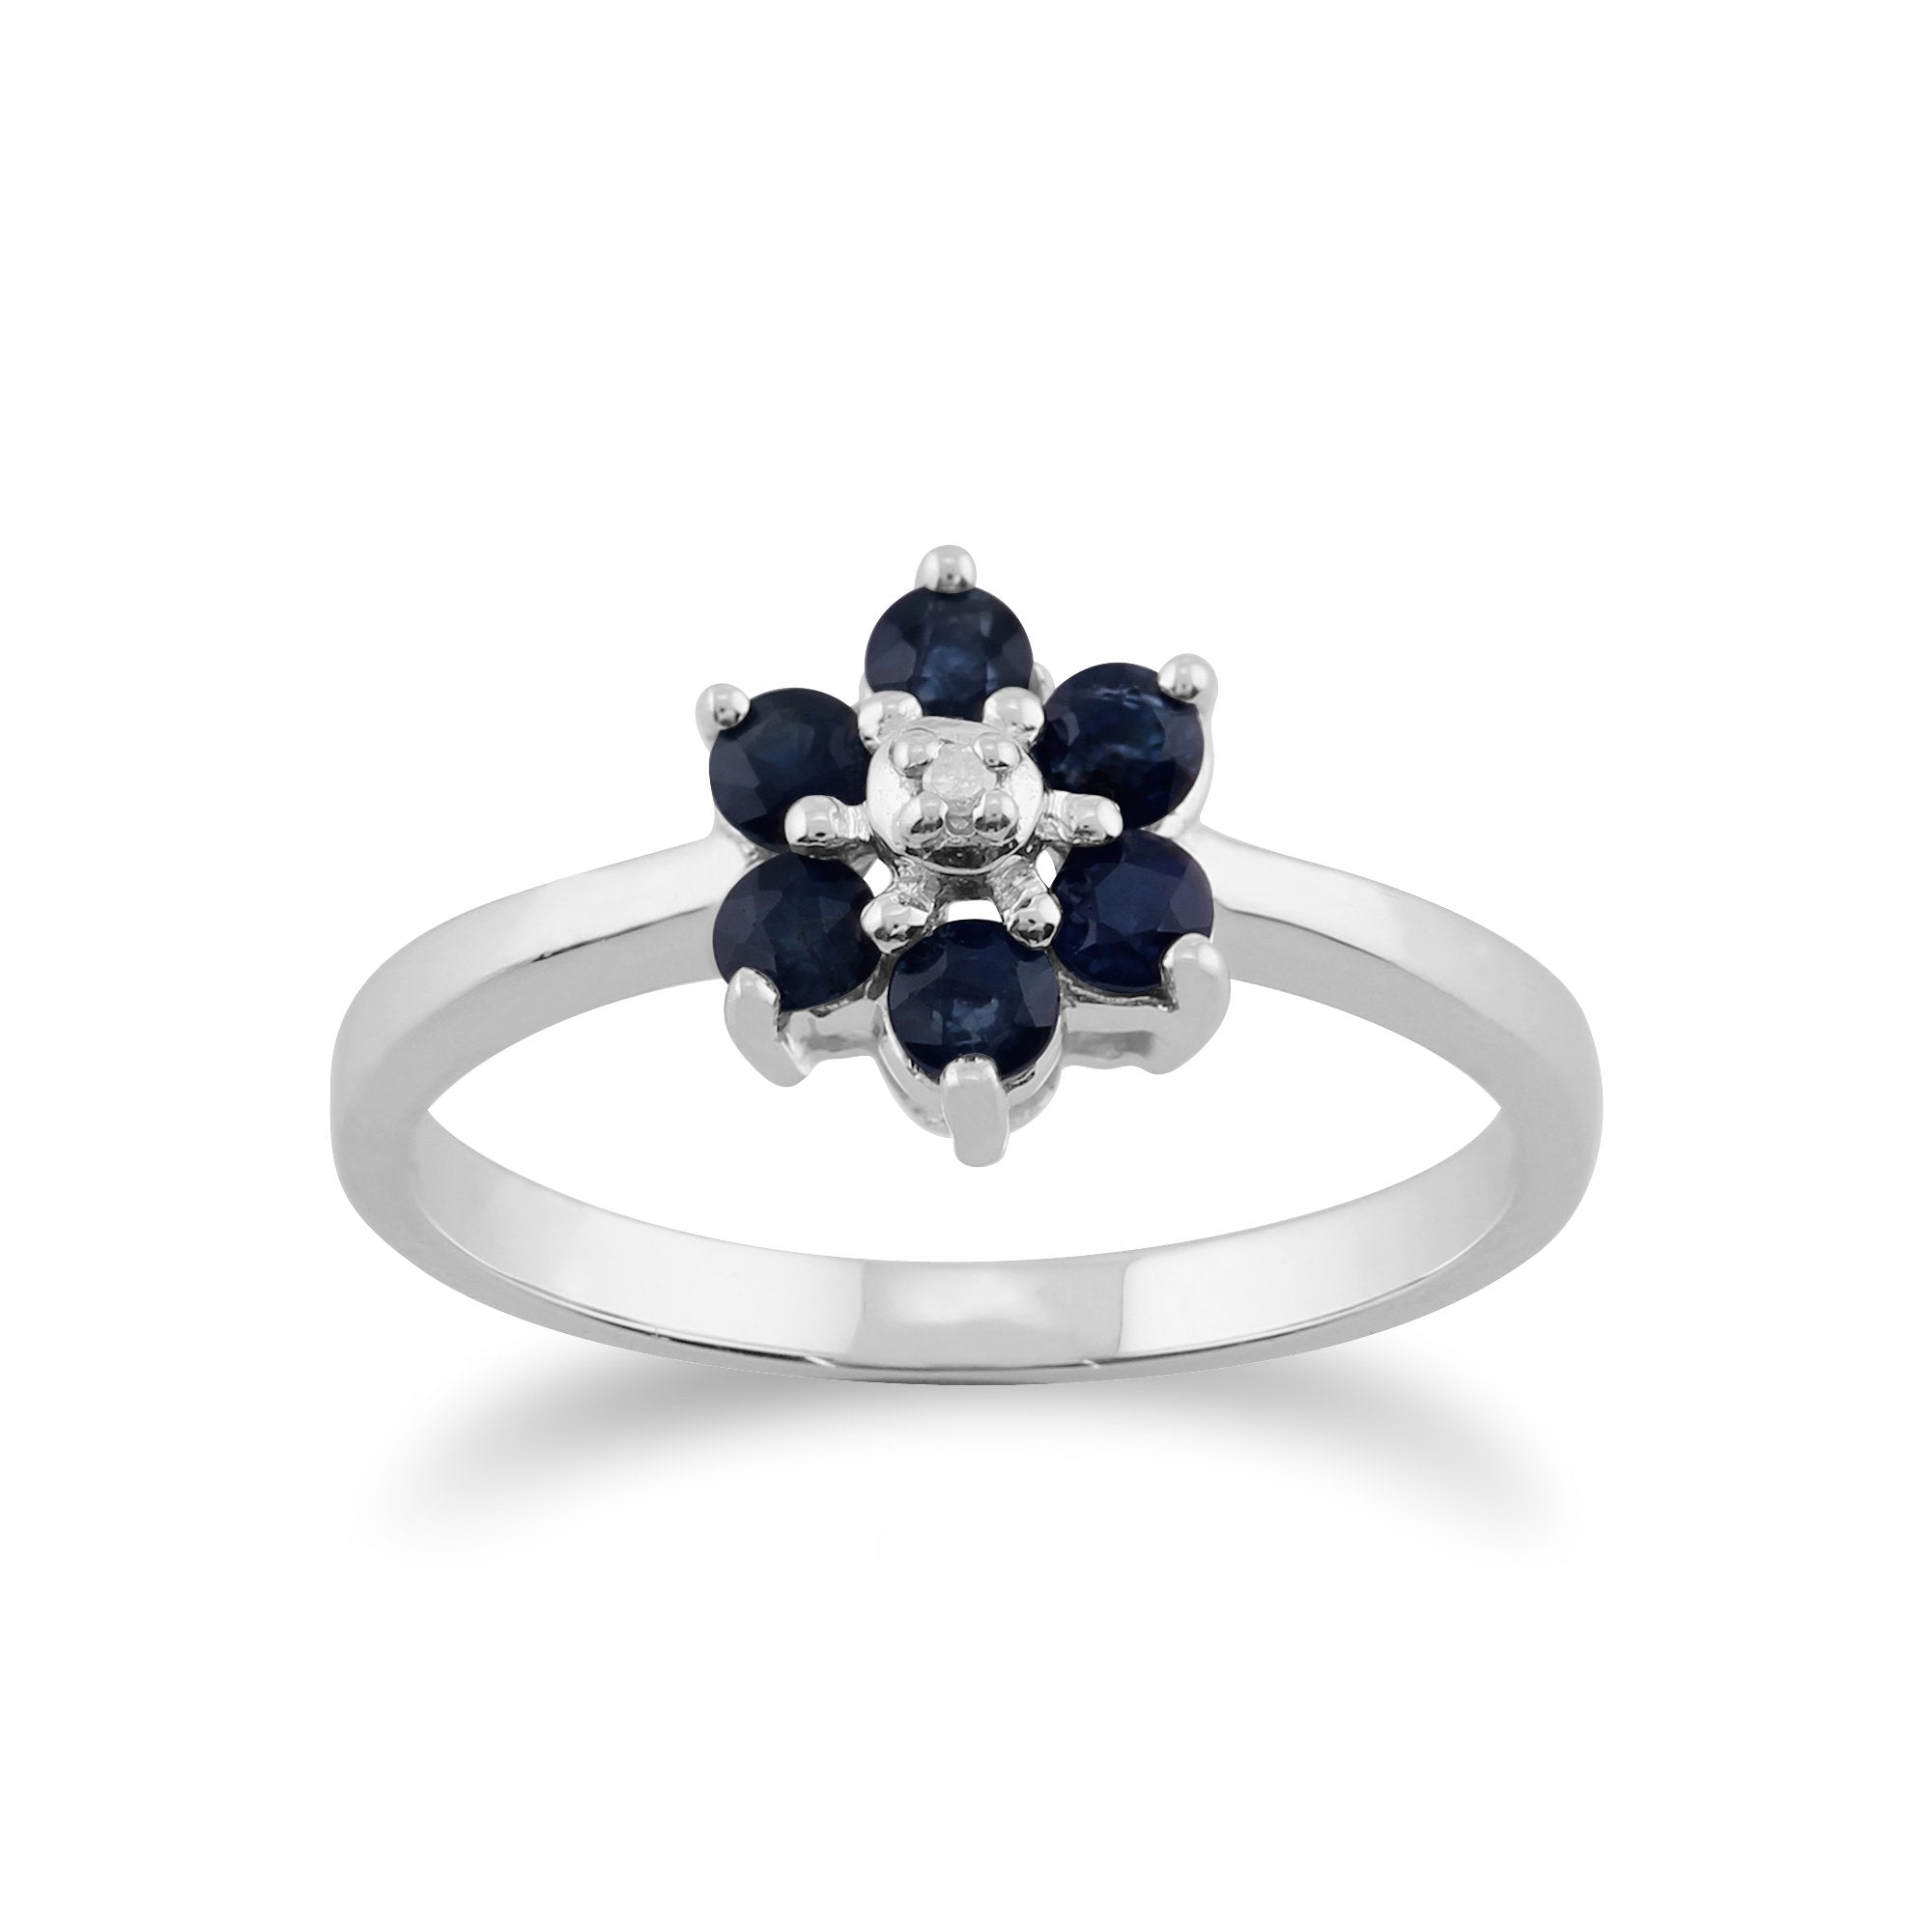 Floral Round Sapphire & Diamond Cluster Ring in 9ct White Gold